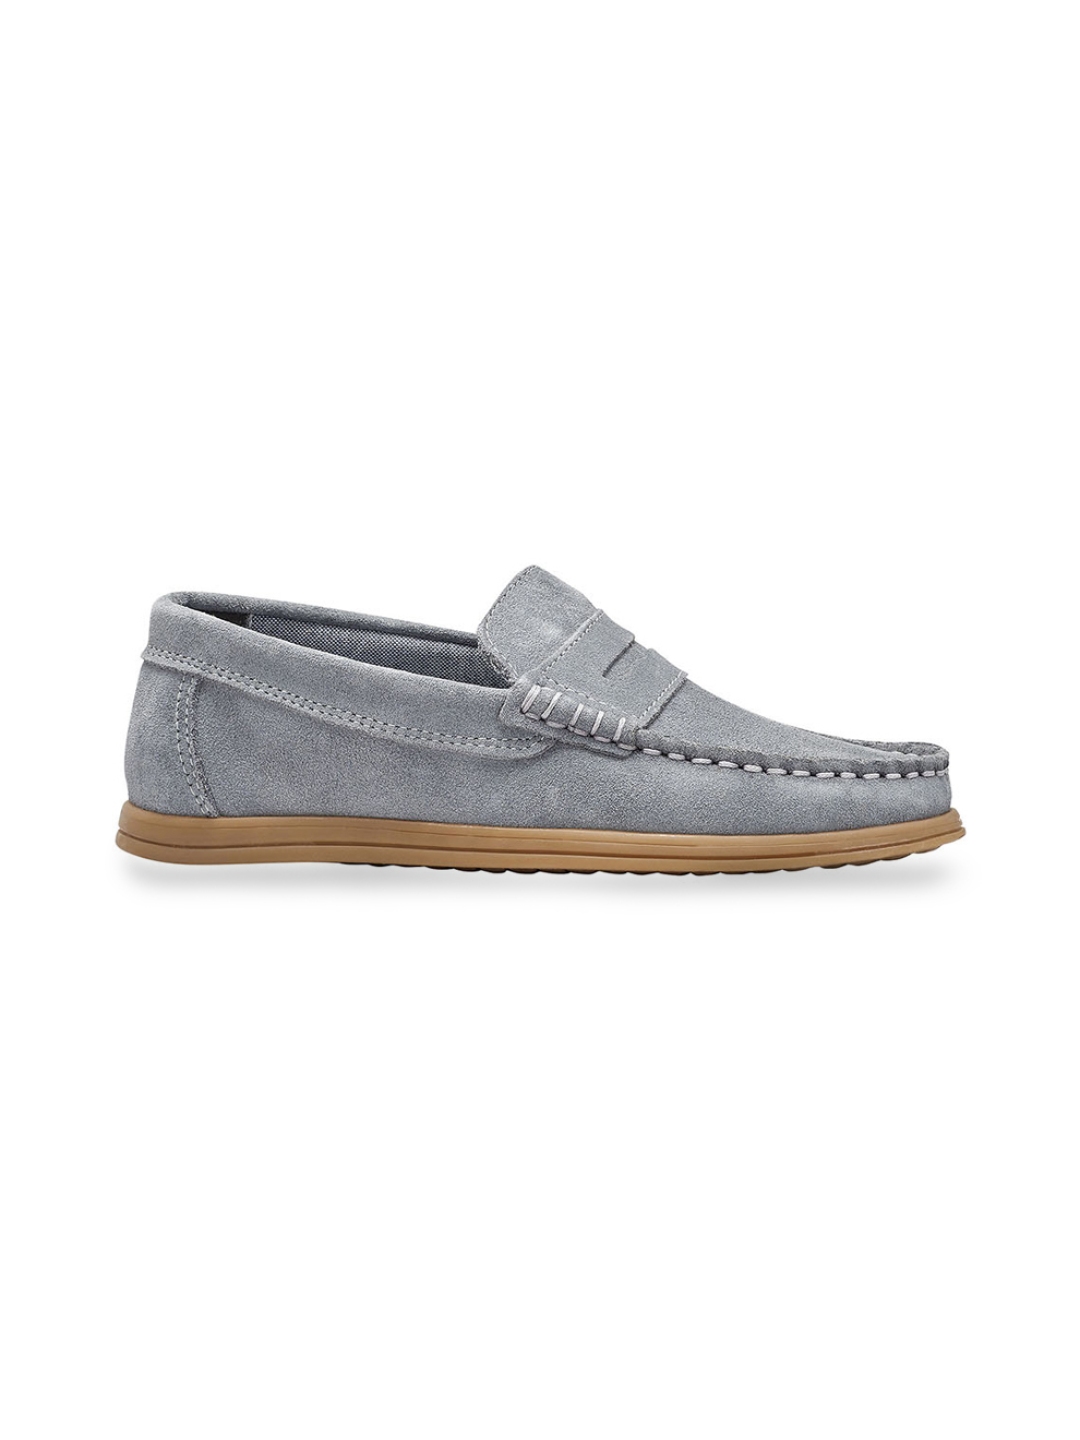 Buy Next Boys Blue Suede Loafers - Casual Shoes for Boys 4028154 | Myntra